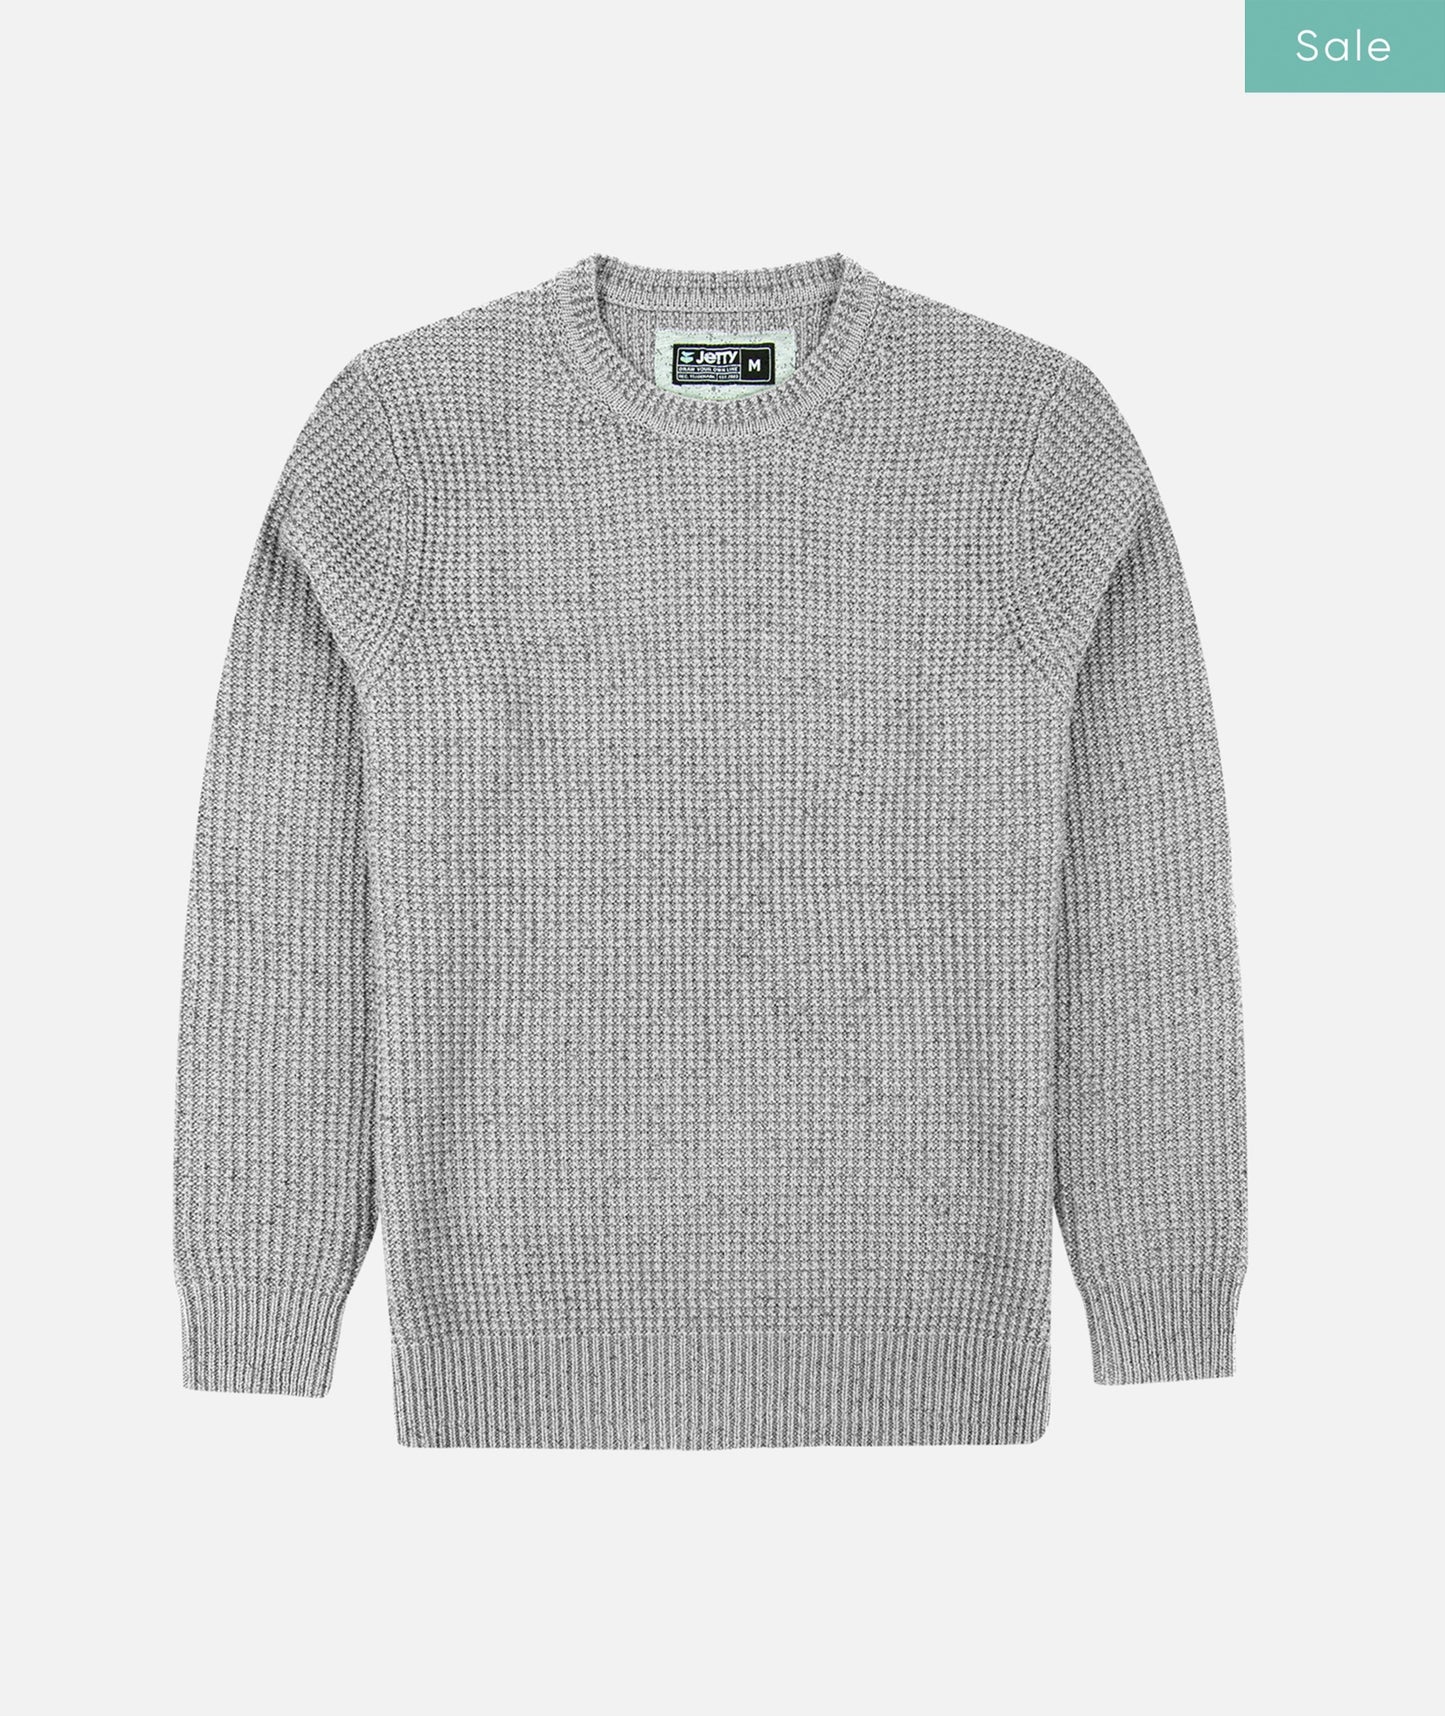 The Paragon Sweater - Heather Grey